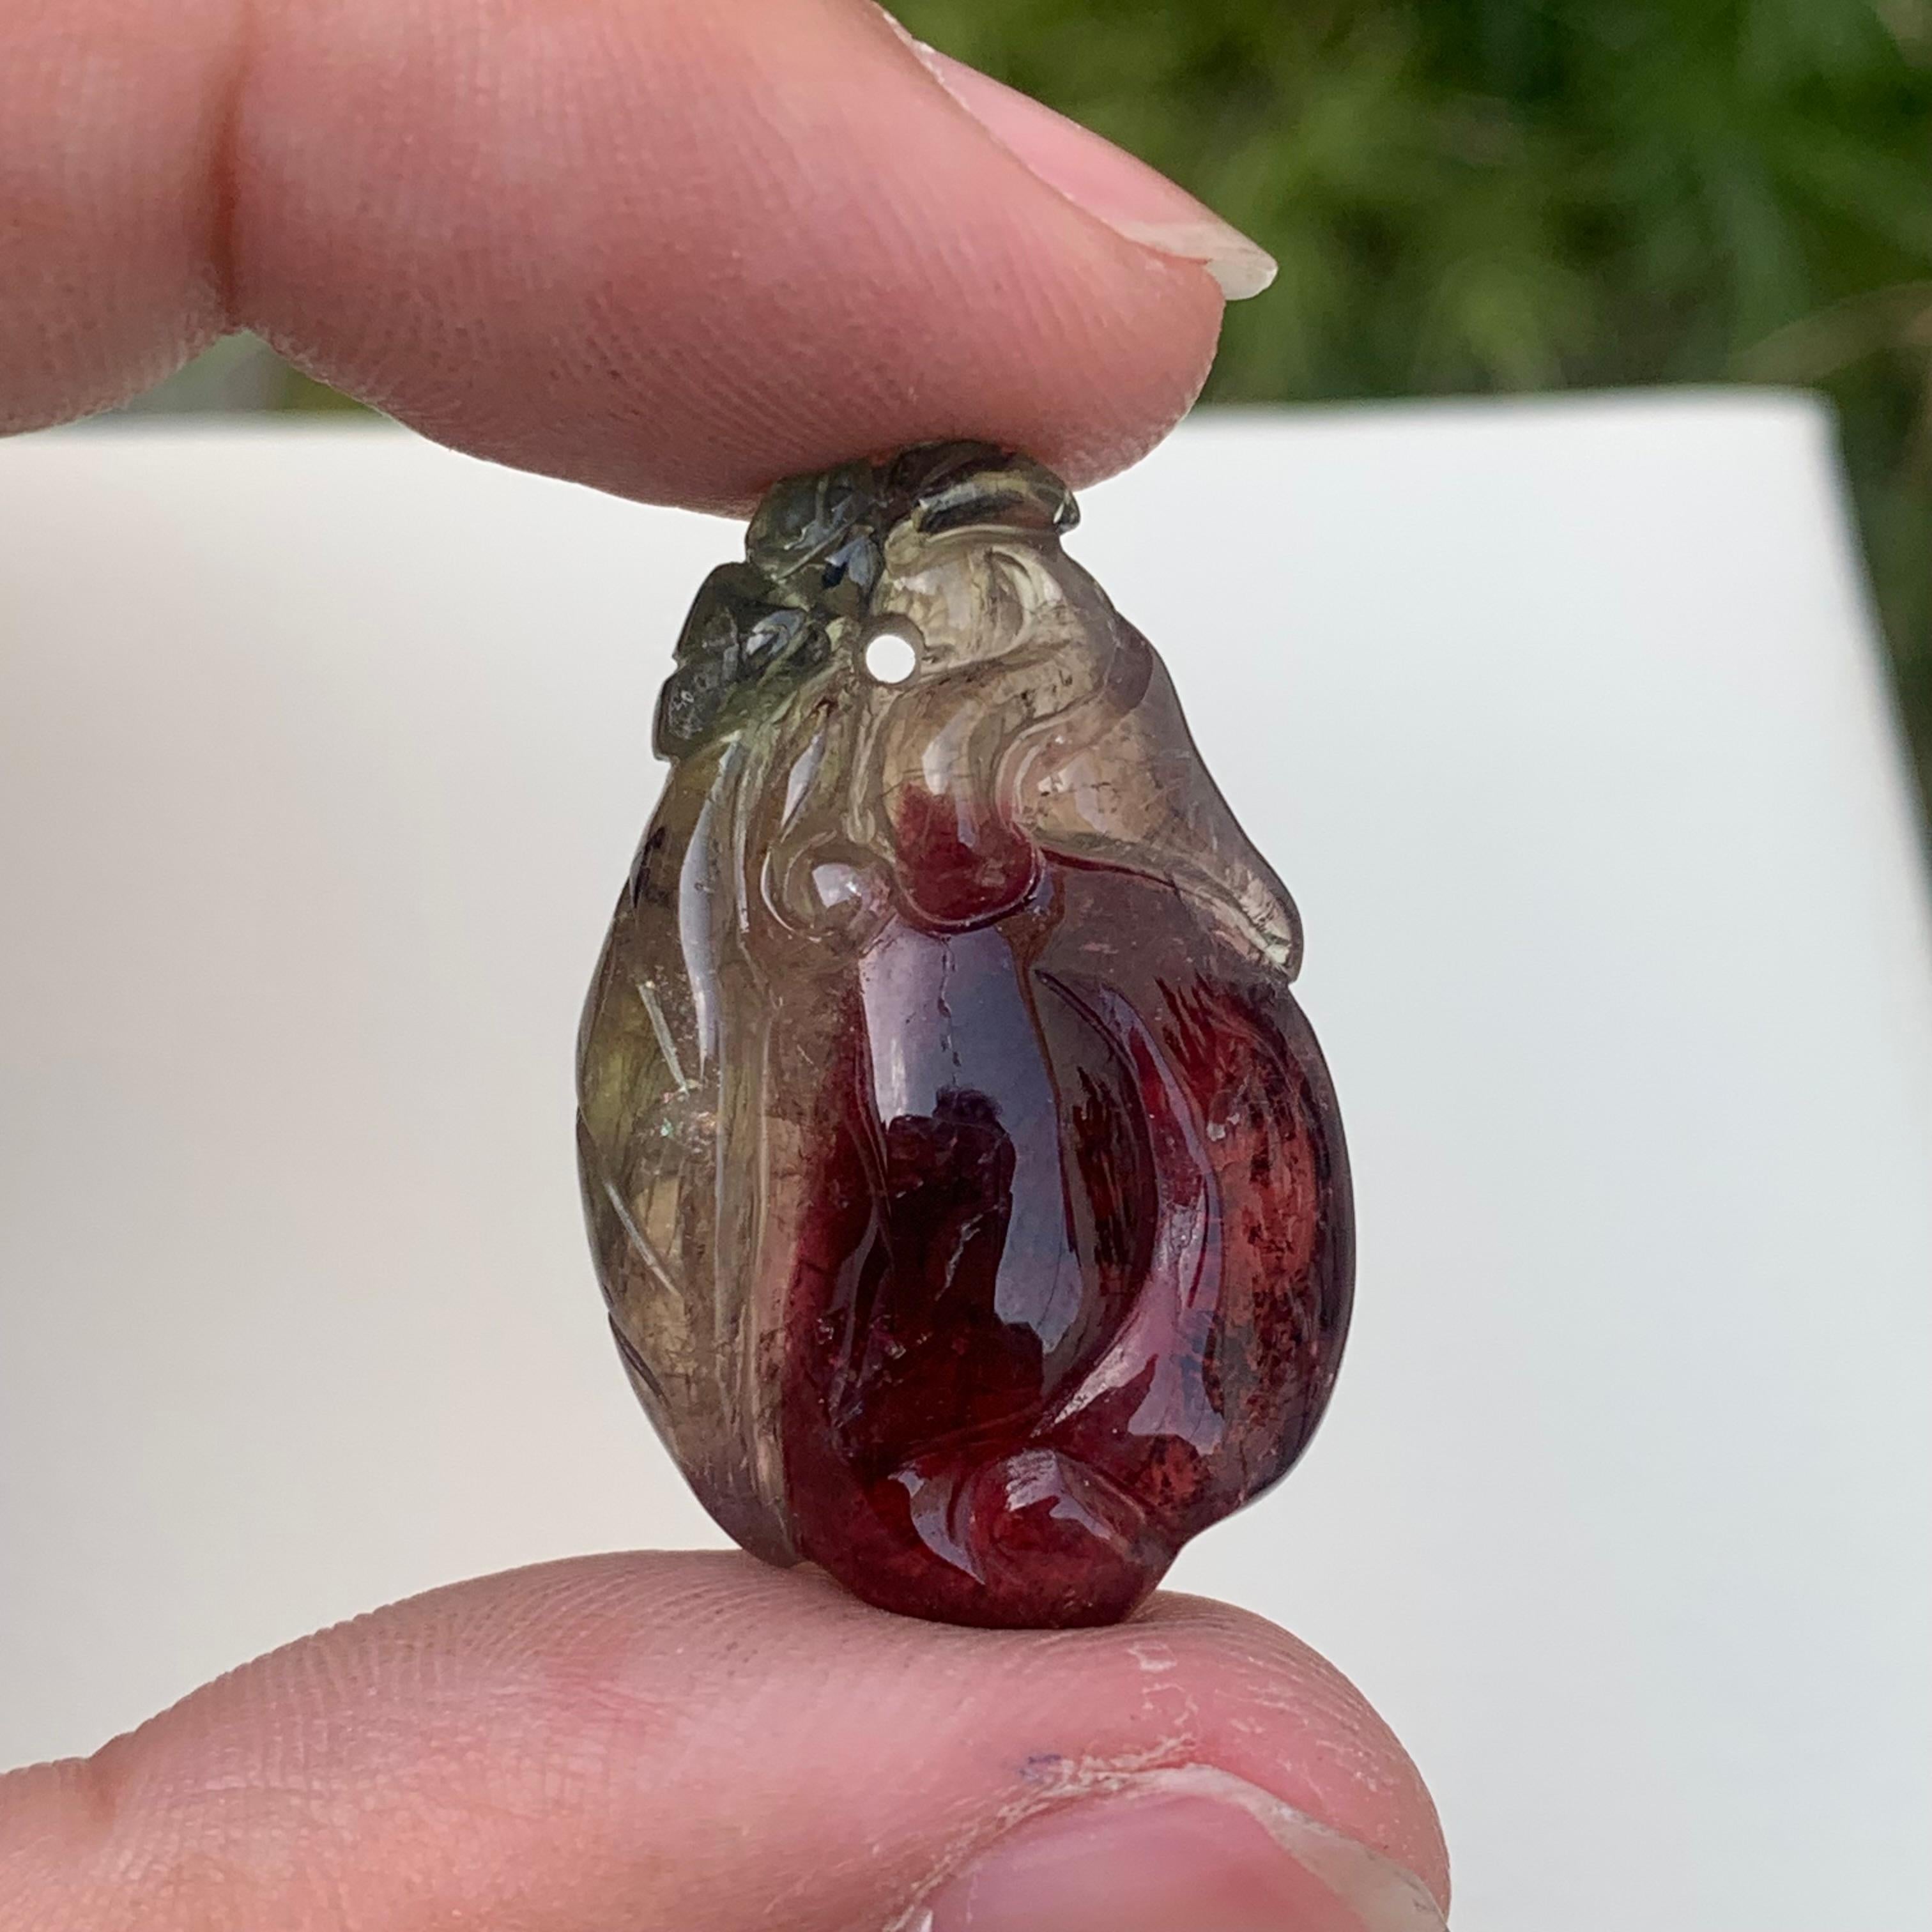 Malagasy 34.60 Carat Amazing Bi Color Fruit Shape Tourmaline Drilled Carving from Africa For Sale